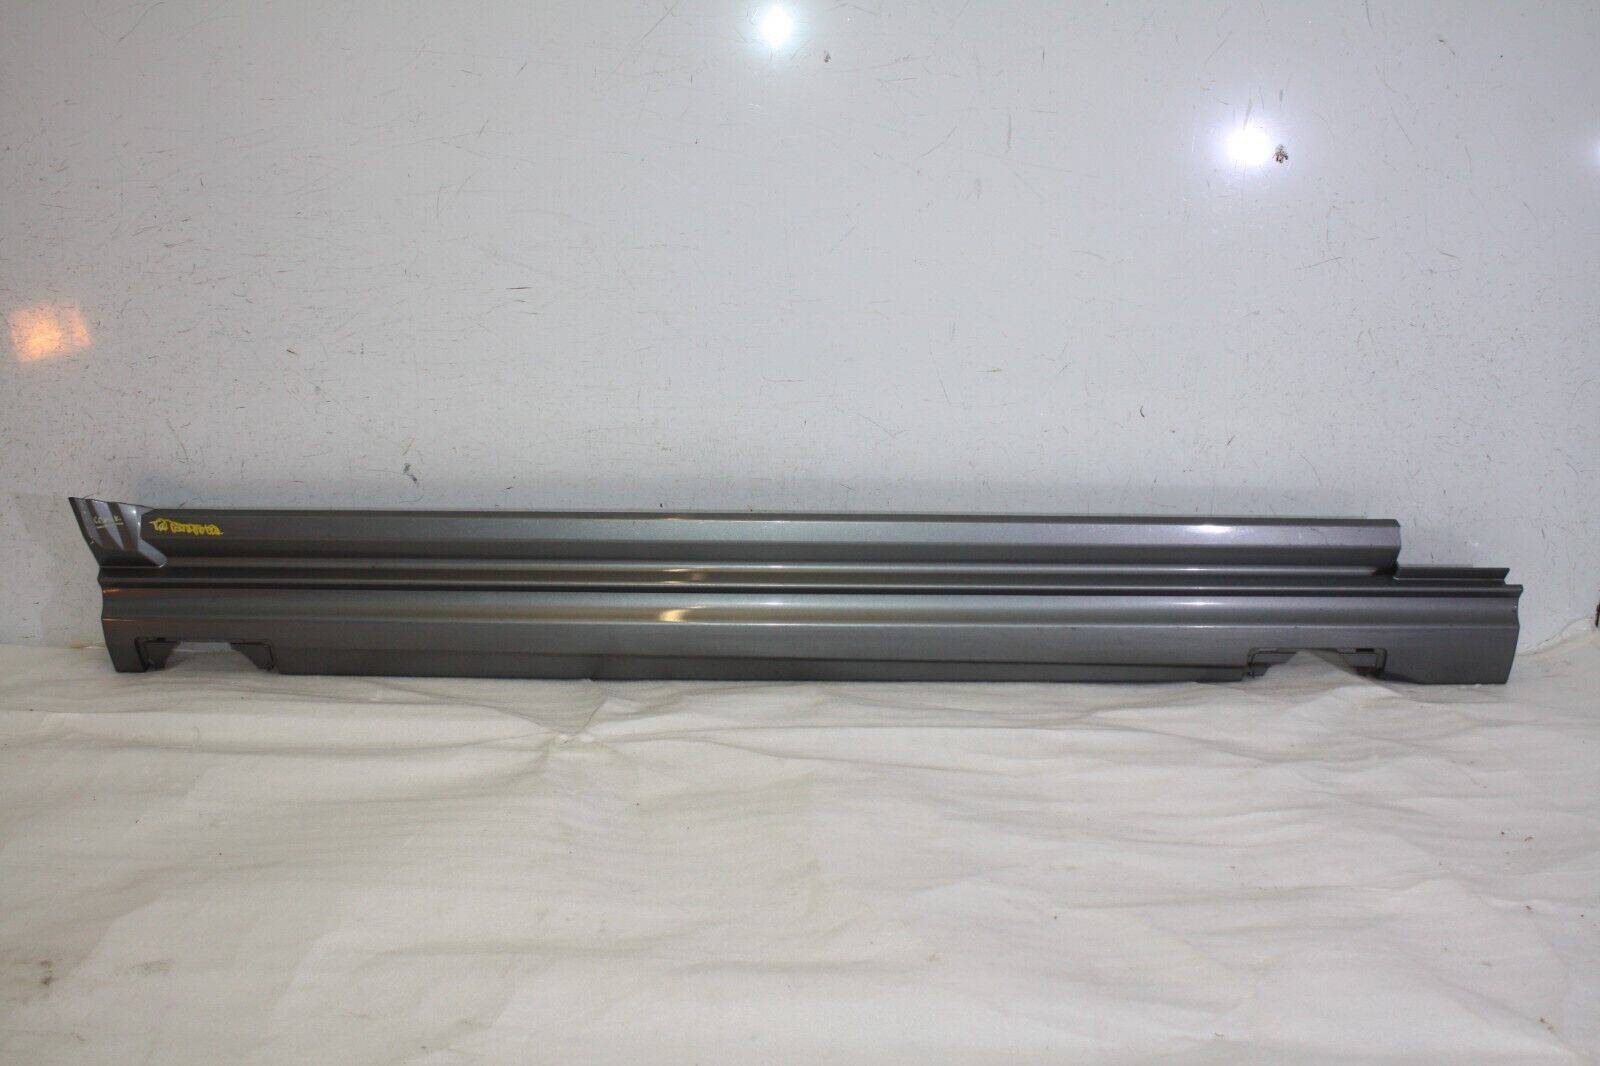 Range Rover Autobiography Right Side Skirt 2009 TO 2012 BH4M 200B08 A Genuine 176206465992